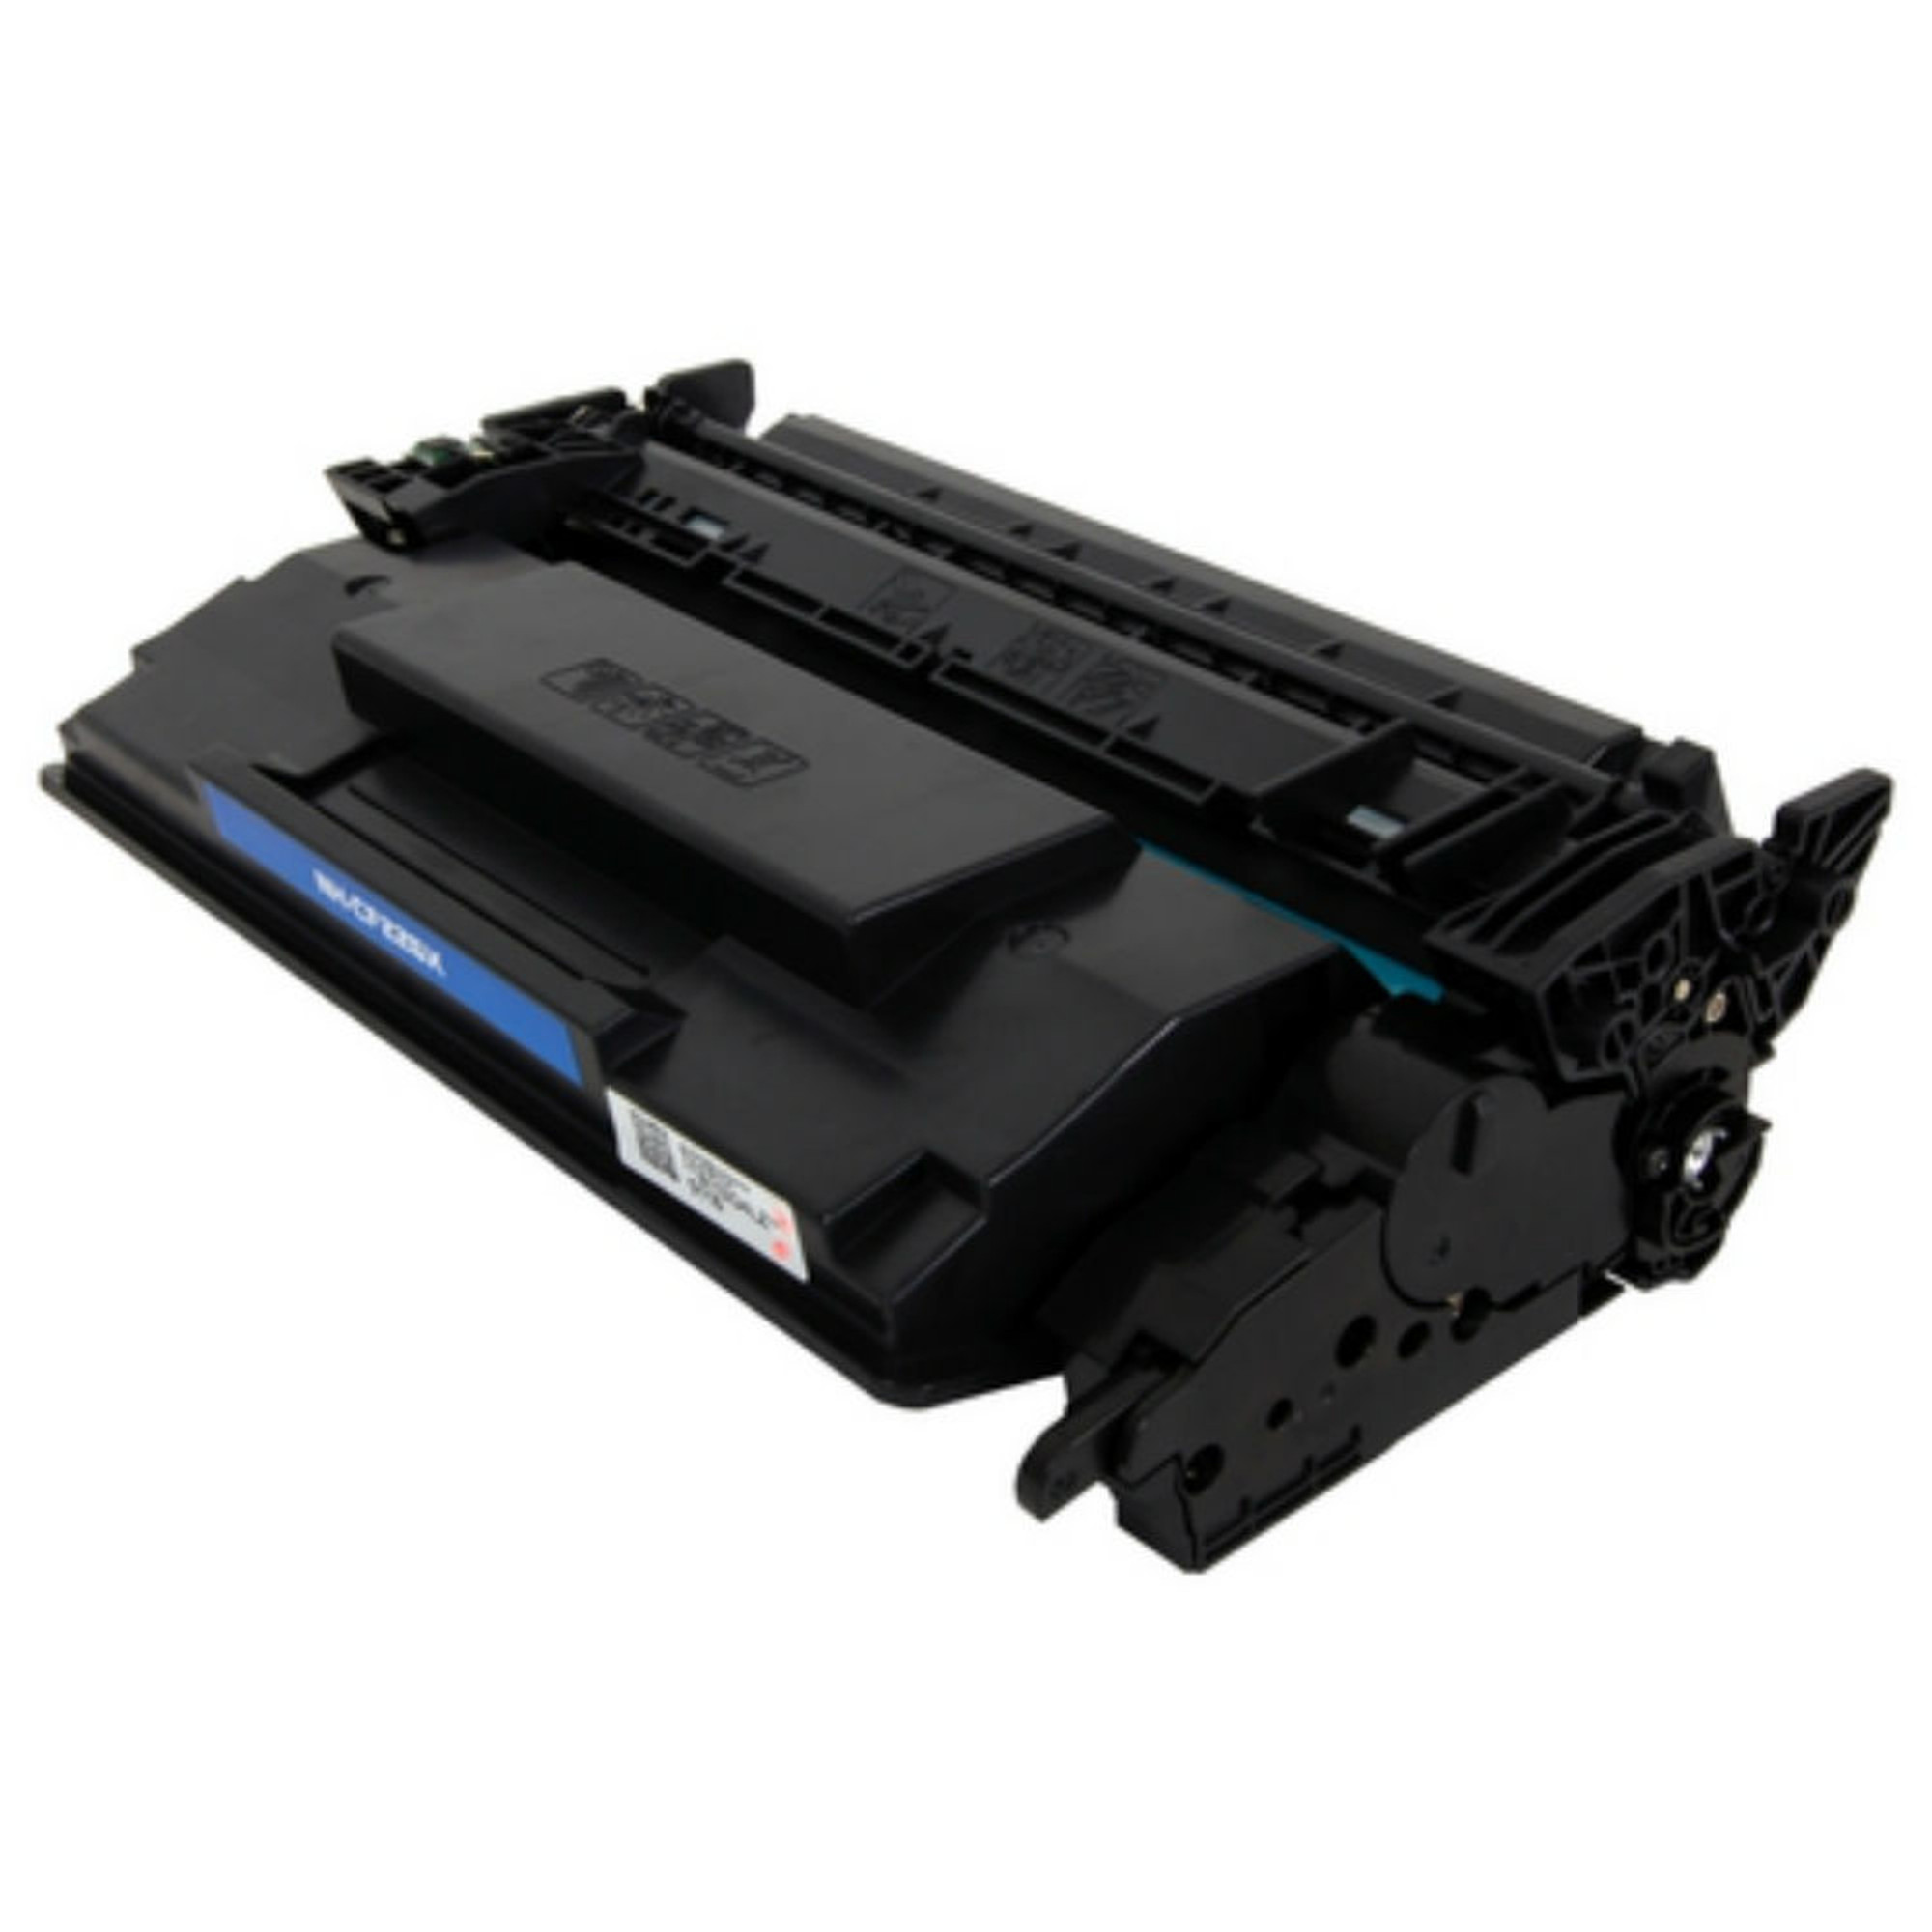 HP Toner for HP 402dn